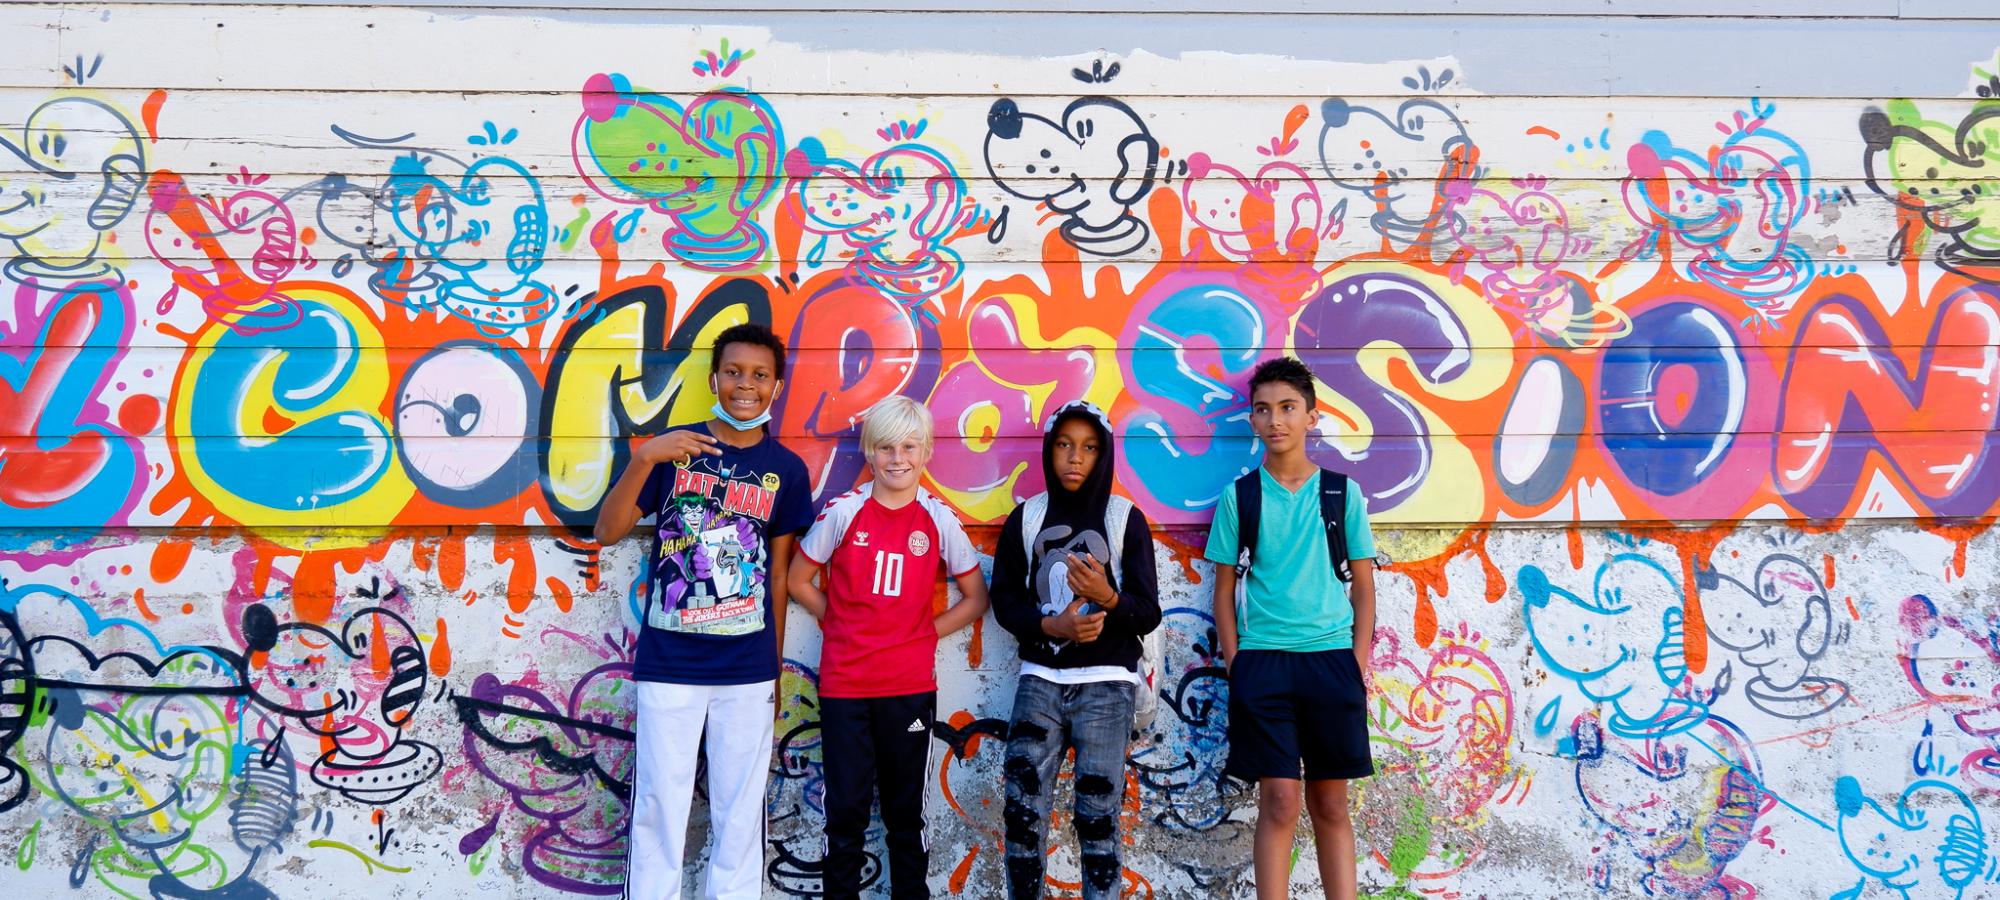 boys pose in front of a mural